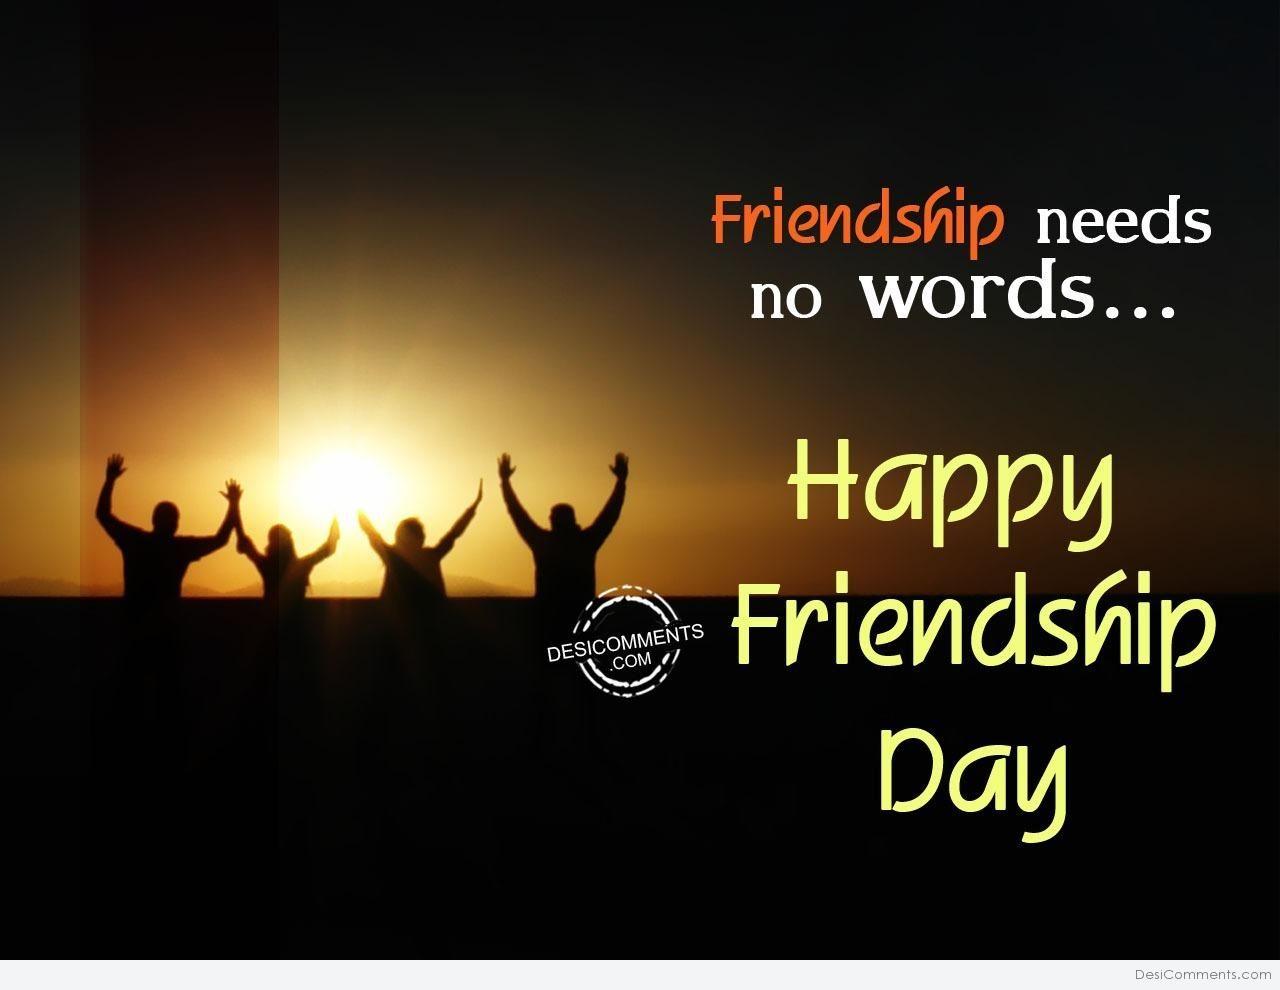 Friendship Day Picture, Image, Graphics